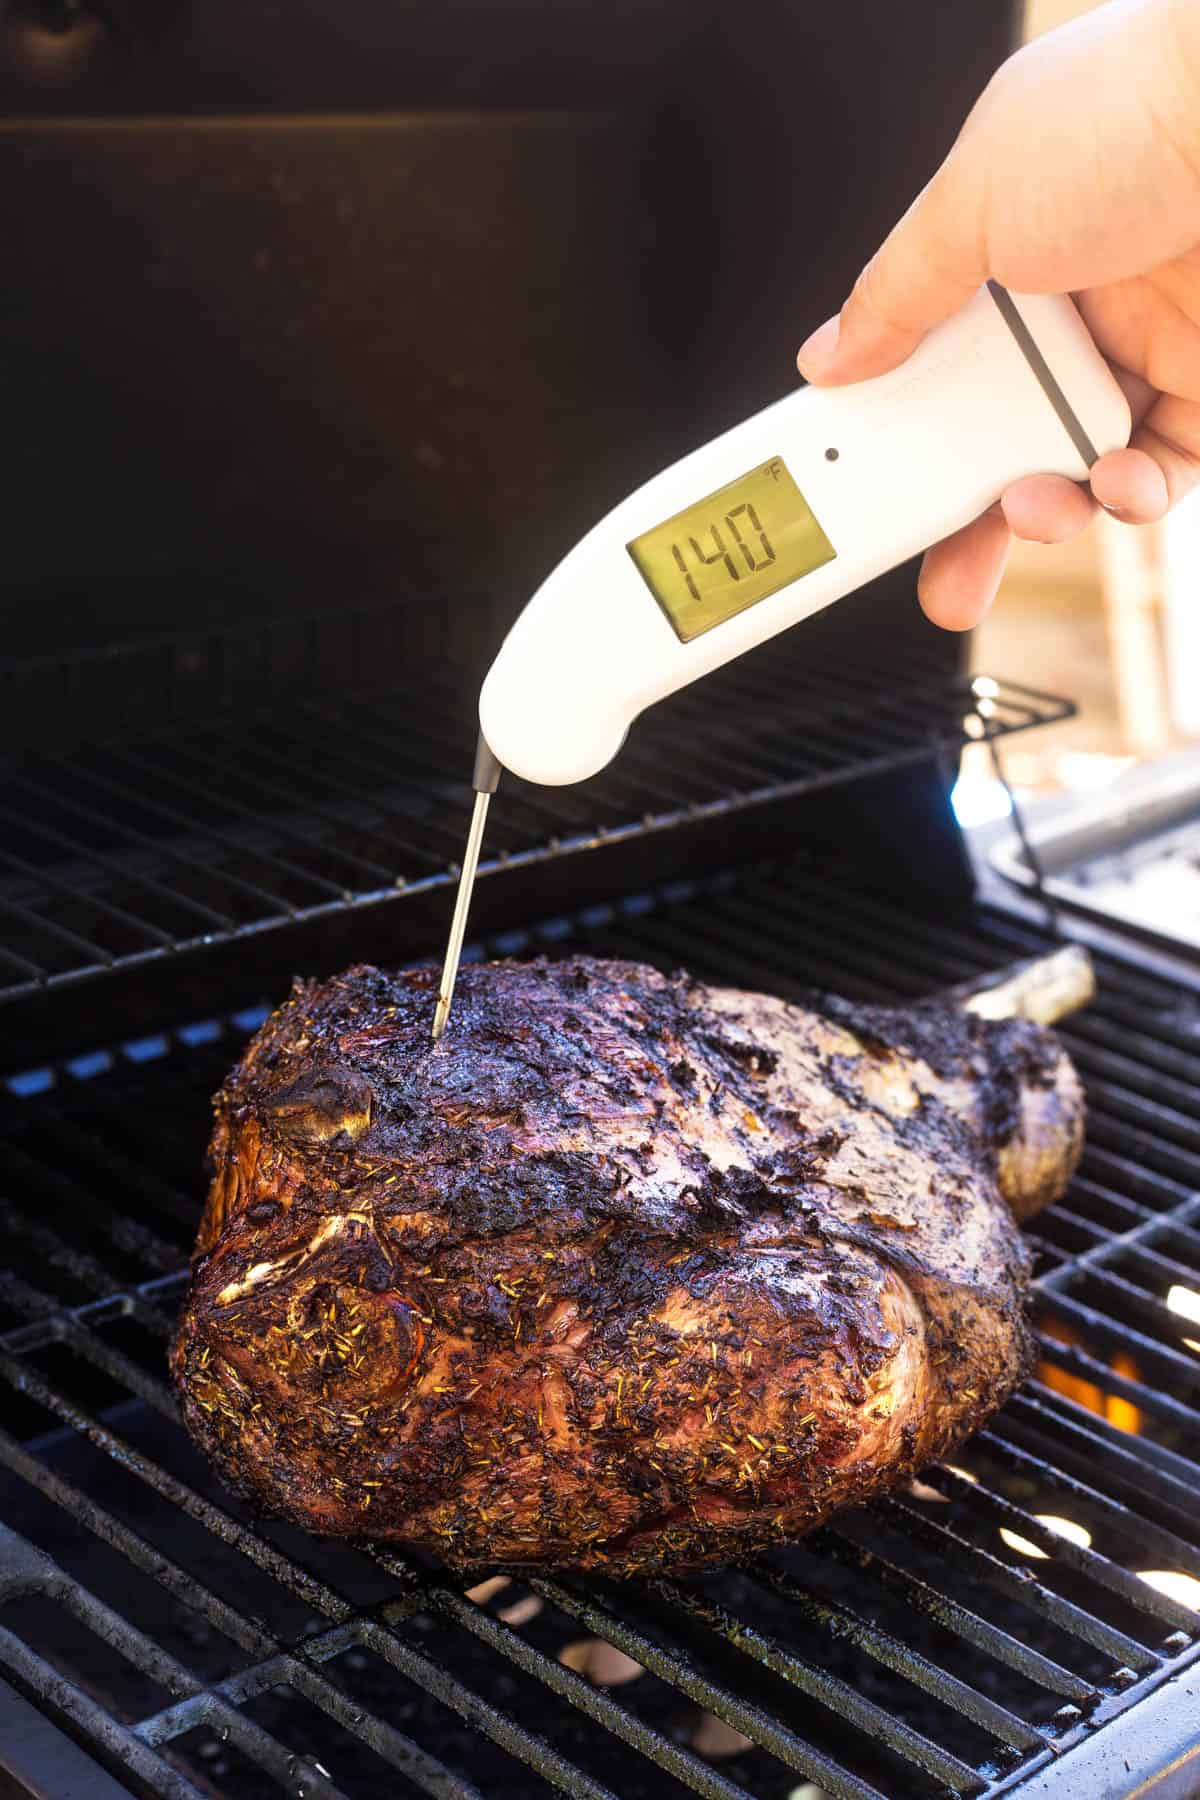 Checking the temperature of the lamb while on the grill. 